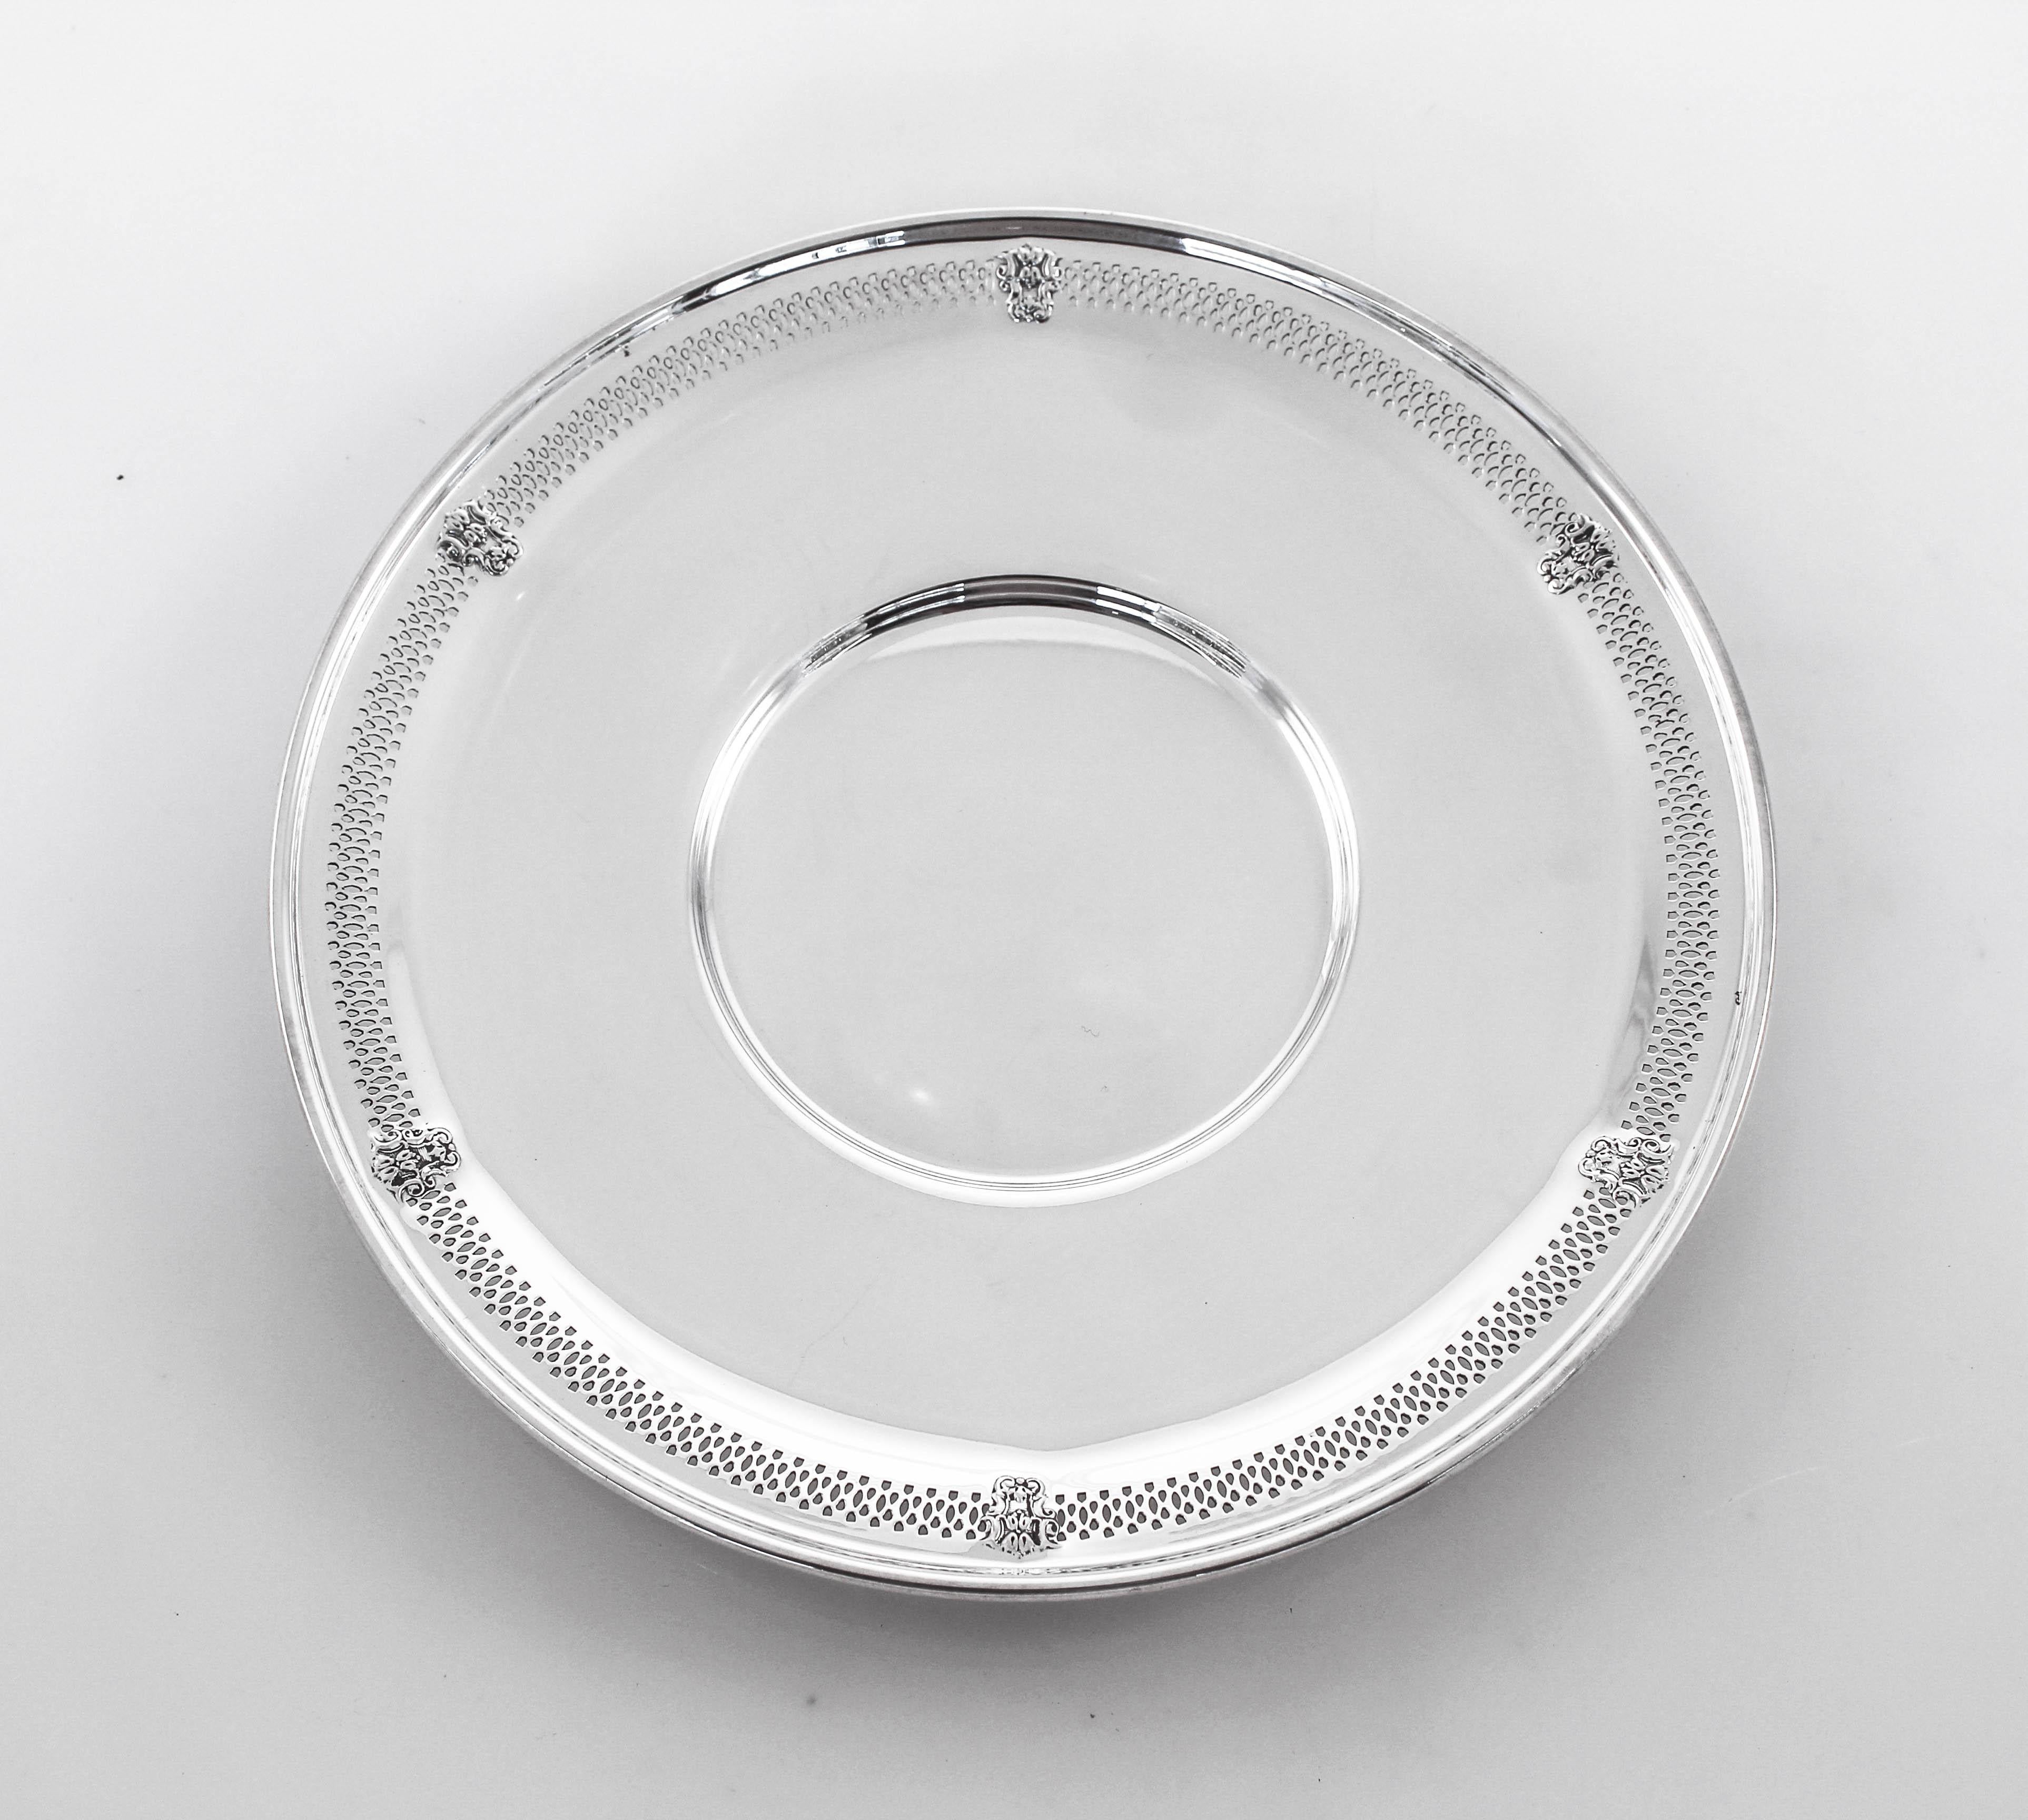 A sterling silver dish this size can be used anytime you have guests over. It’s a nice size for hors d’oeuvres or even desserts. It’s not too big or too small and very functional. A sweet lattice pattern goes around the outer edge. Intercepted by